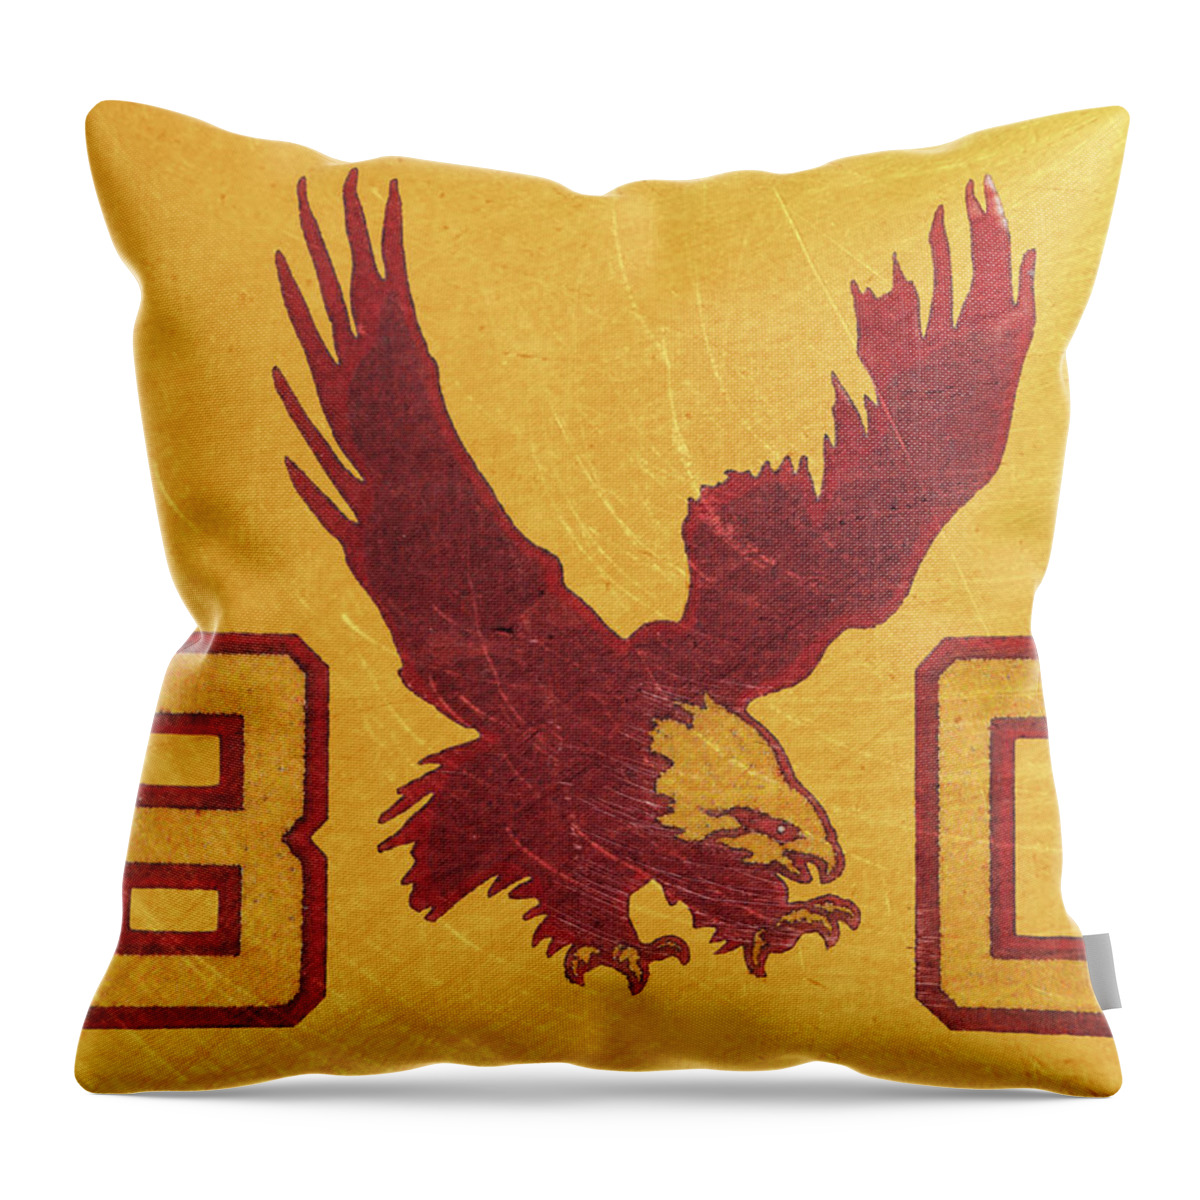 Boston College Throw Pillow featuring the mixed media 1960's Boston College Eagle by Row One Brand